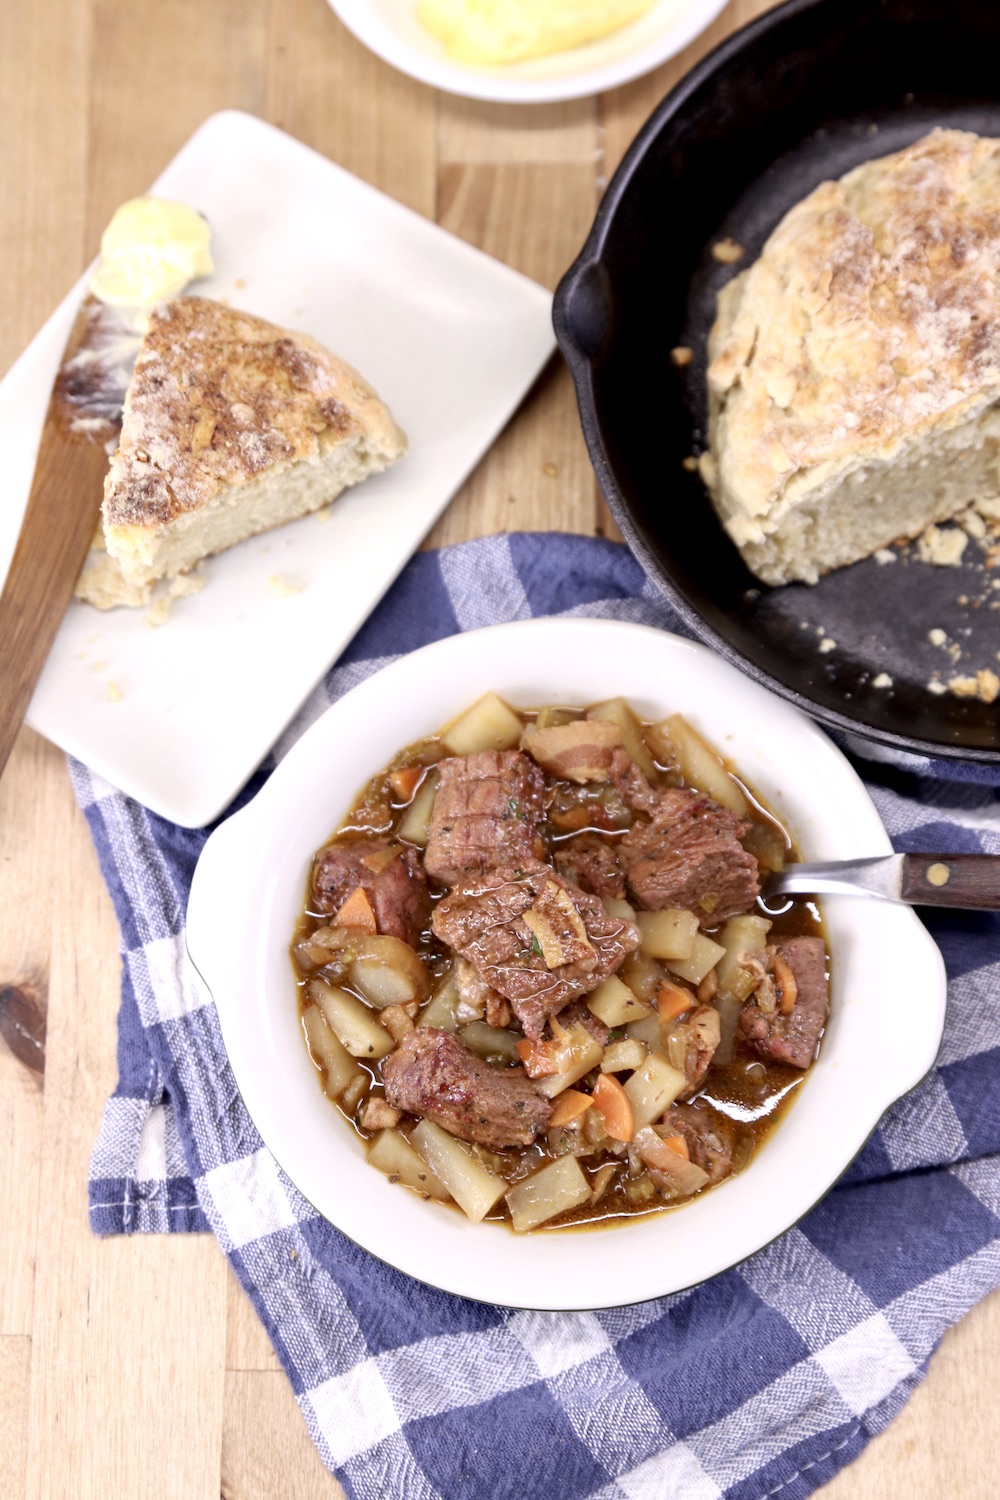 Irish stew with soda bread on a plate and skillet